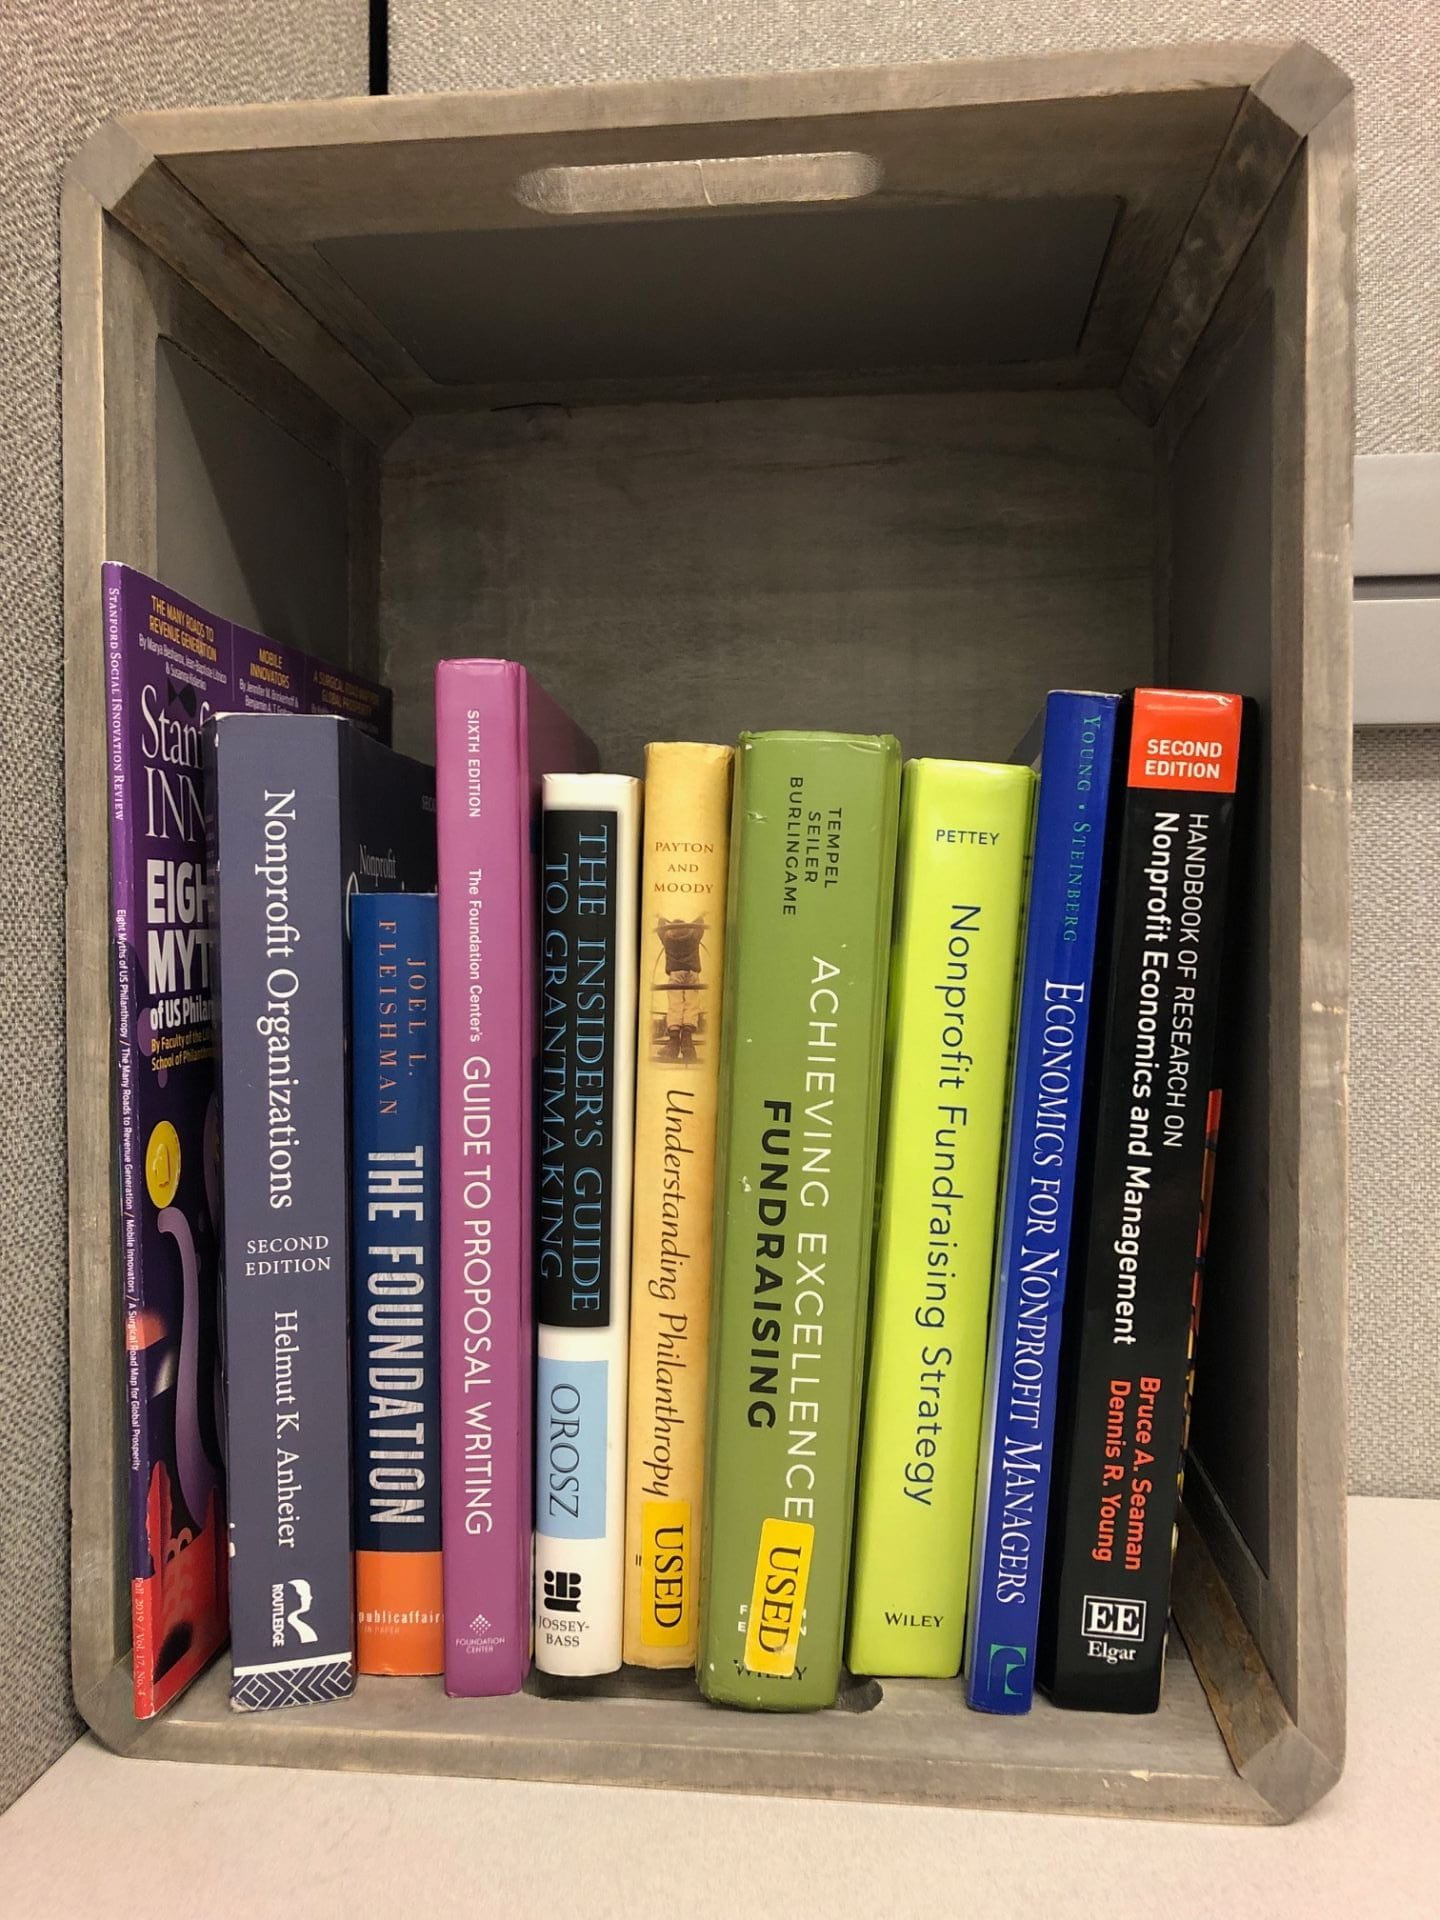 My philanthropy library so far. Any ones missing?